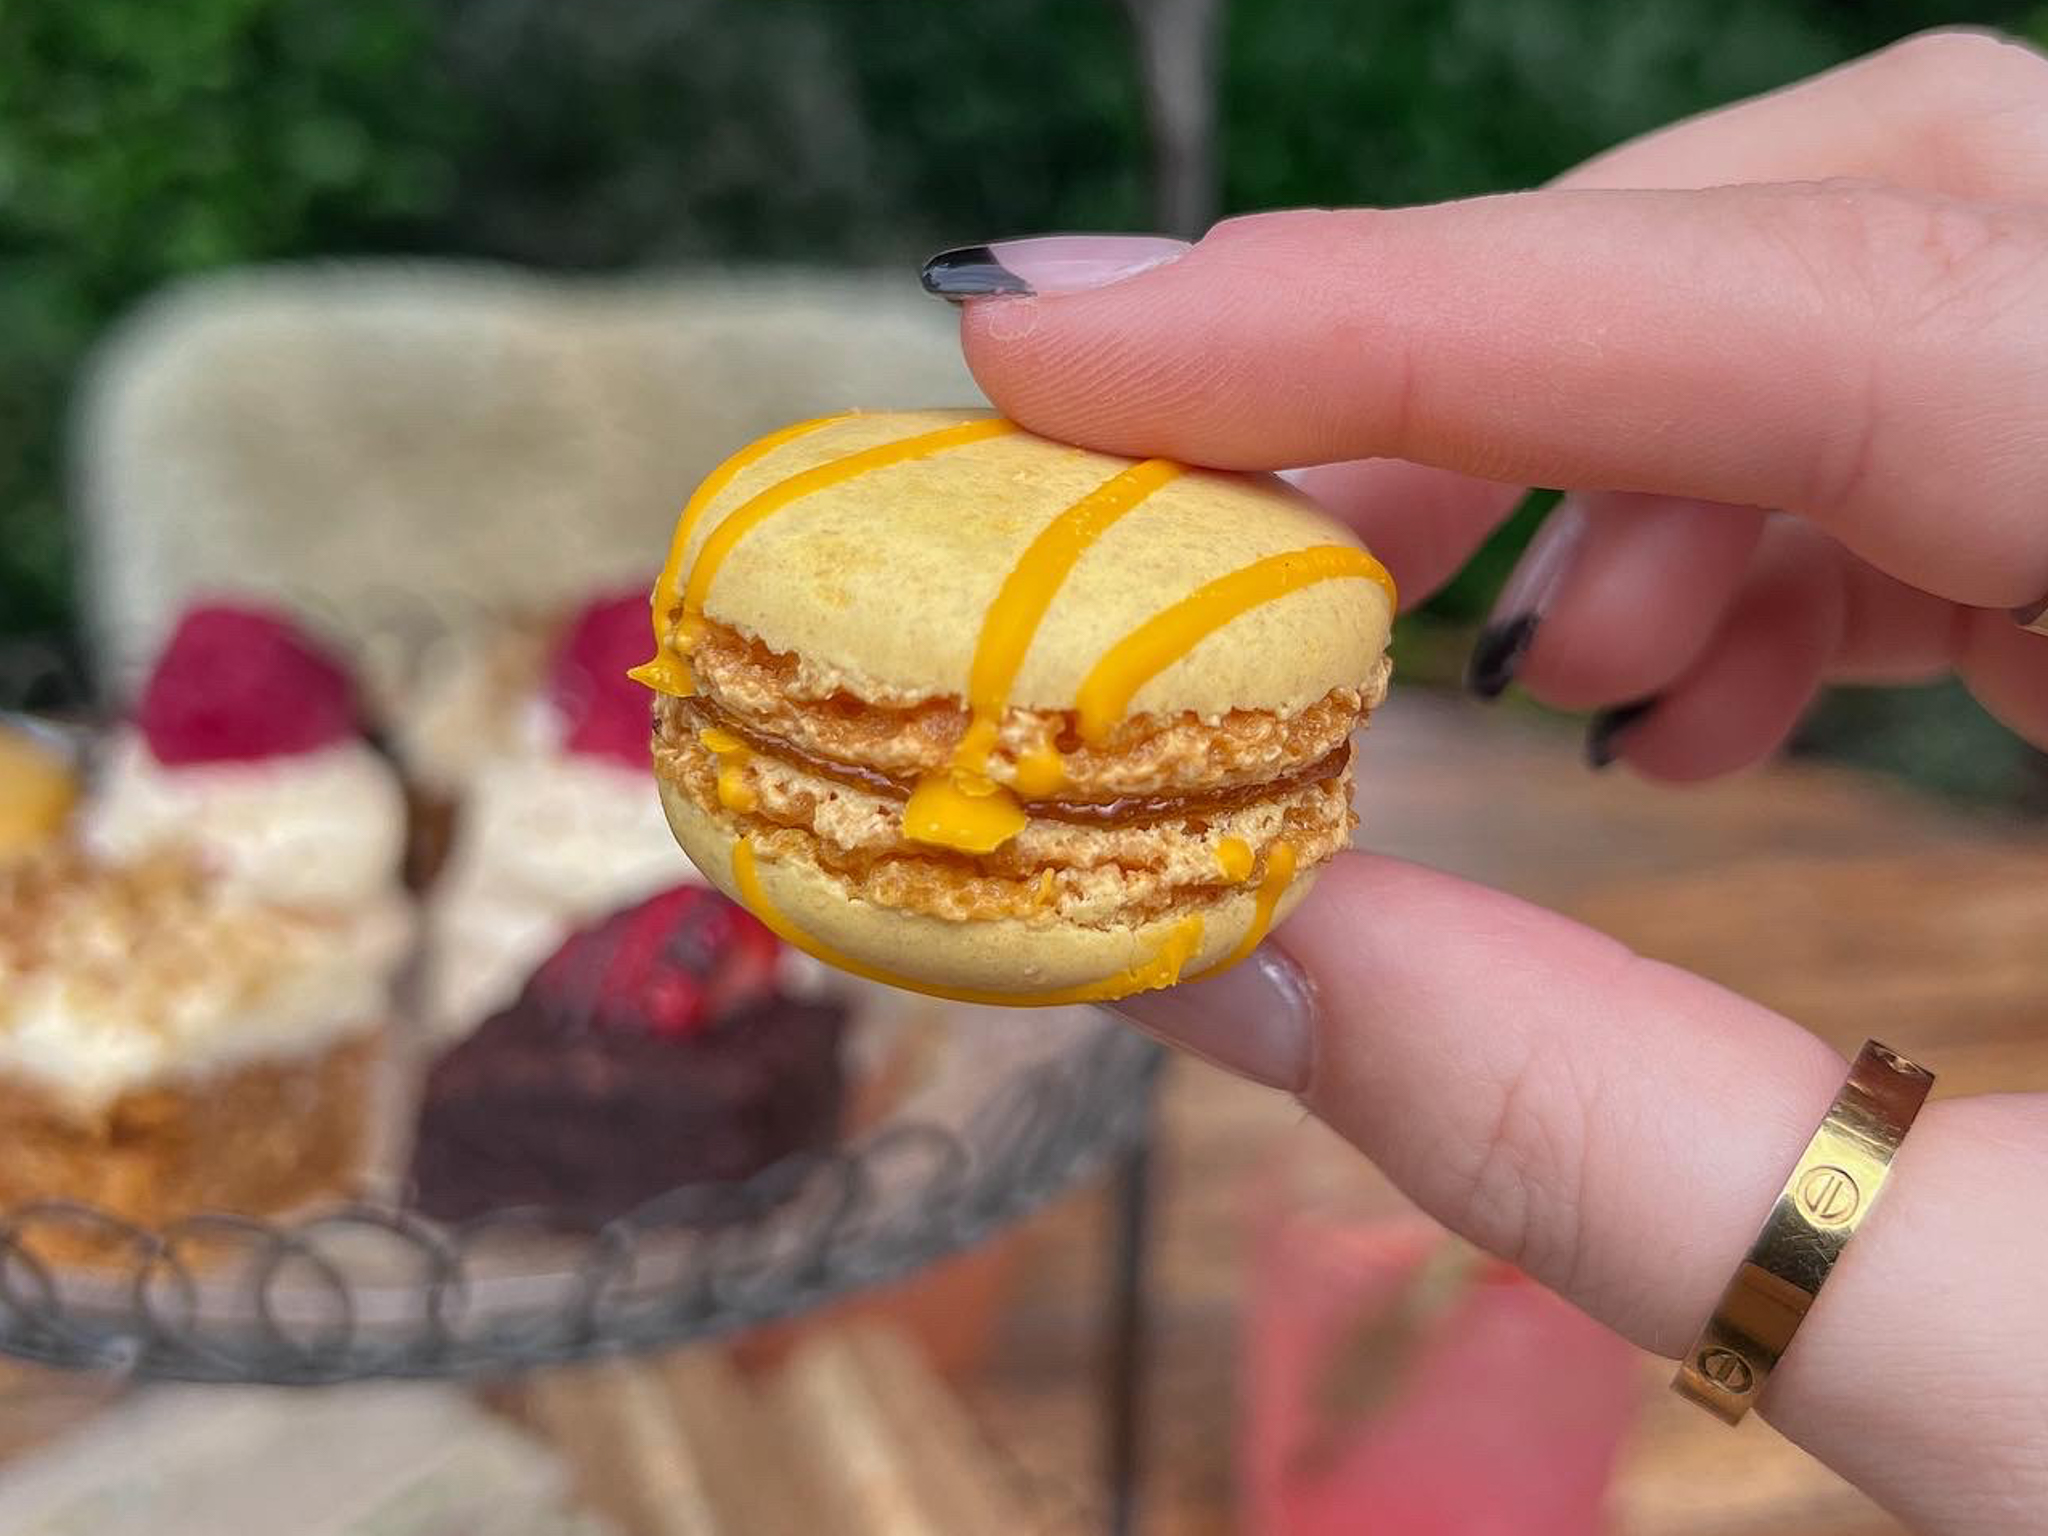 Yellow macaron with blurry background